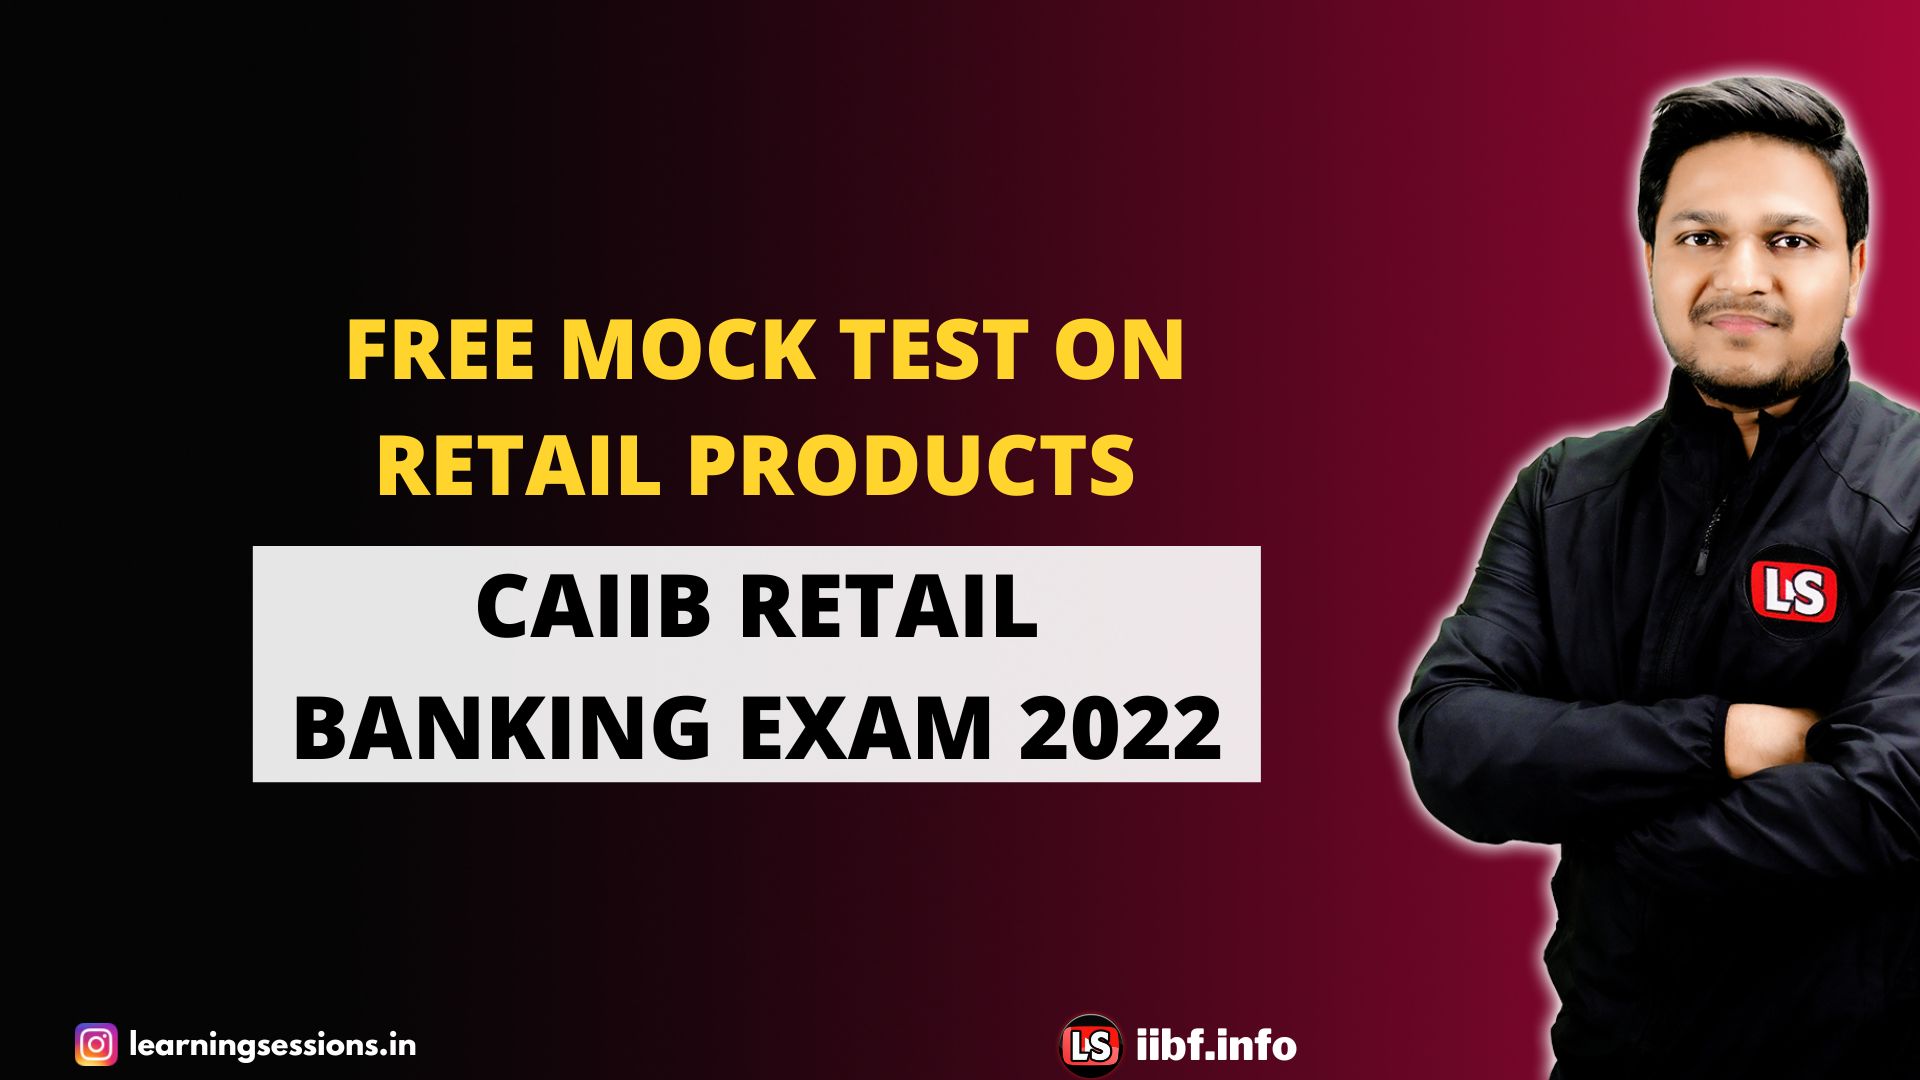 Retail Products Free Mock Test | CAIIB Retail Banking Exam 2022